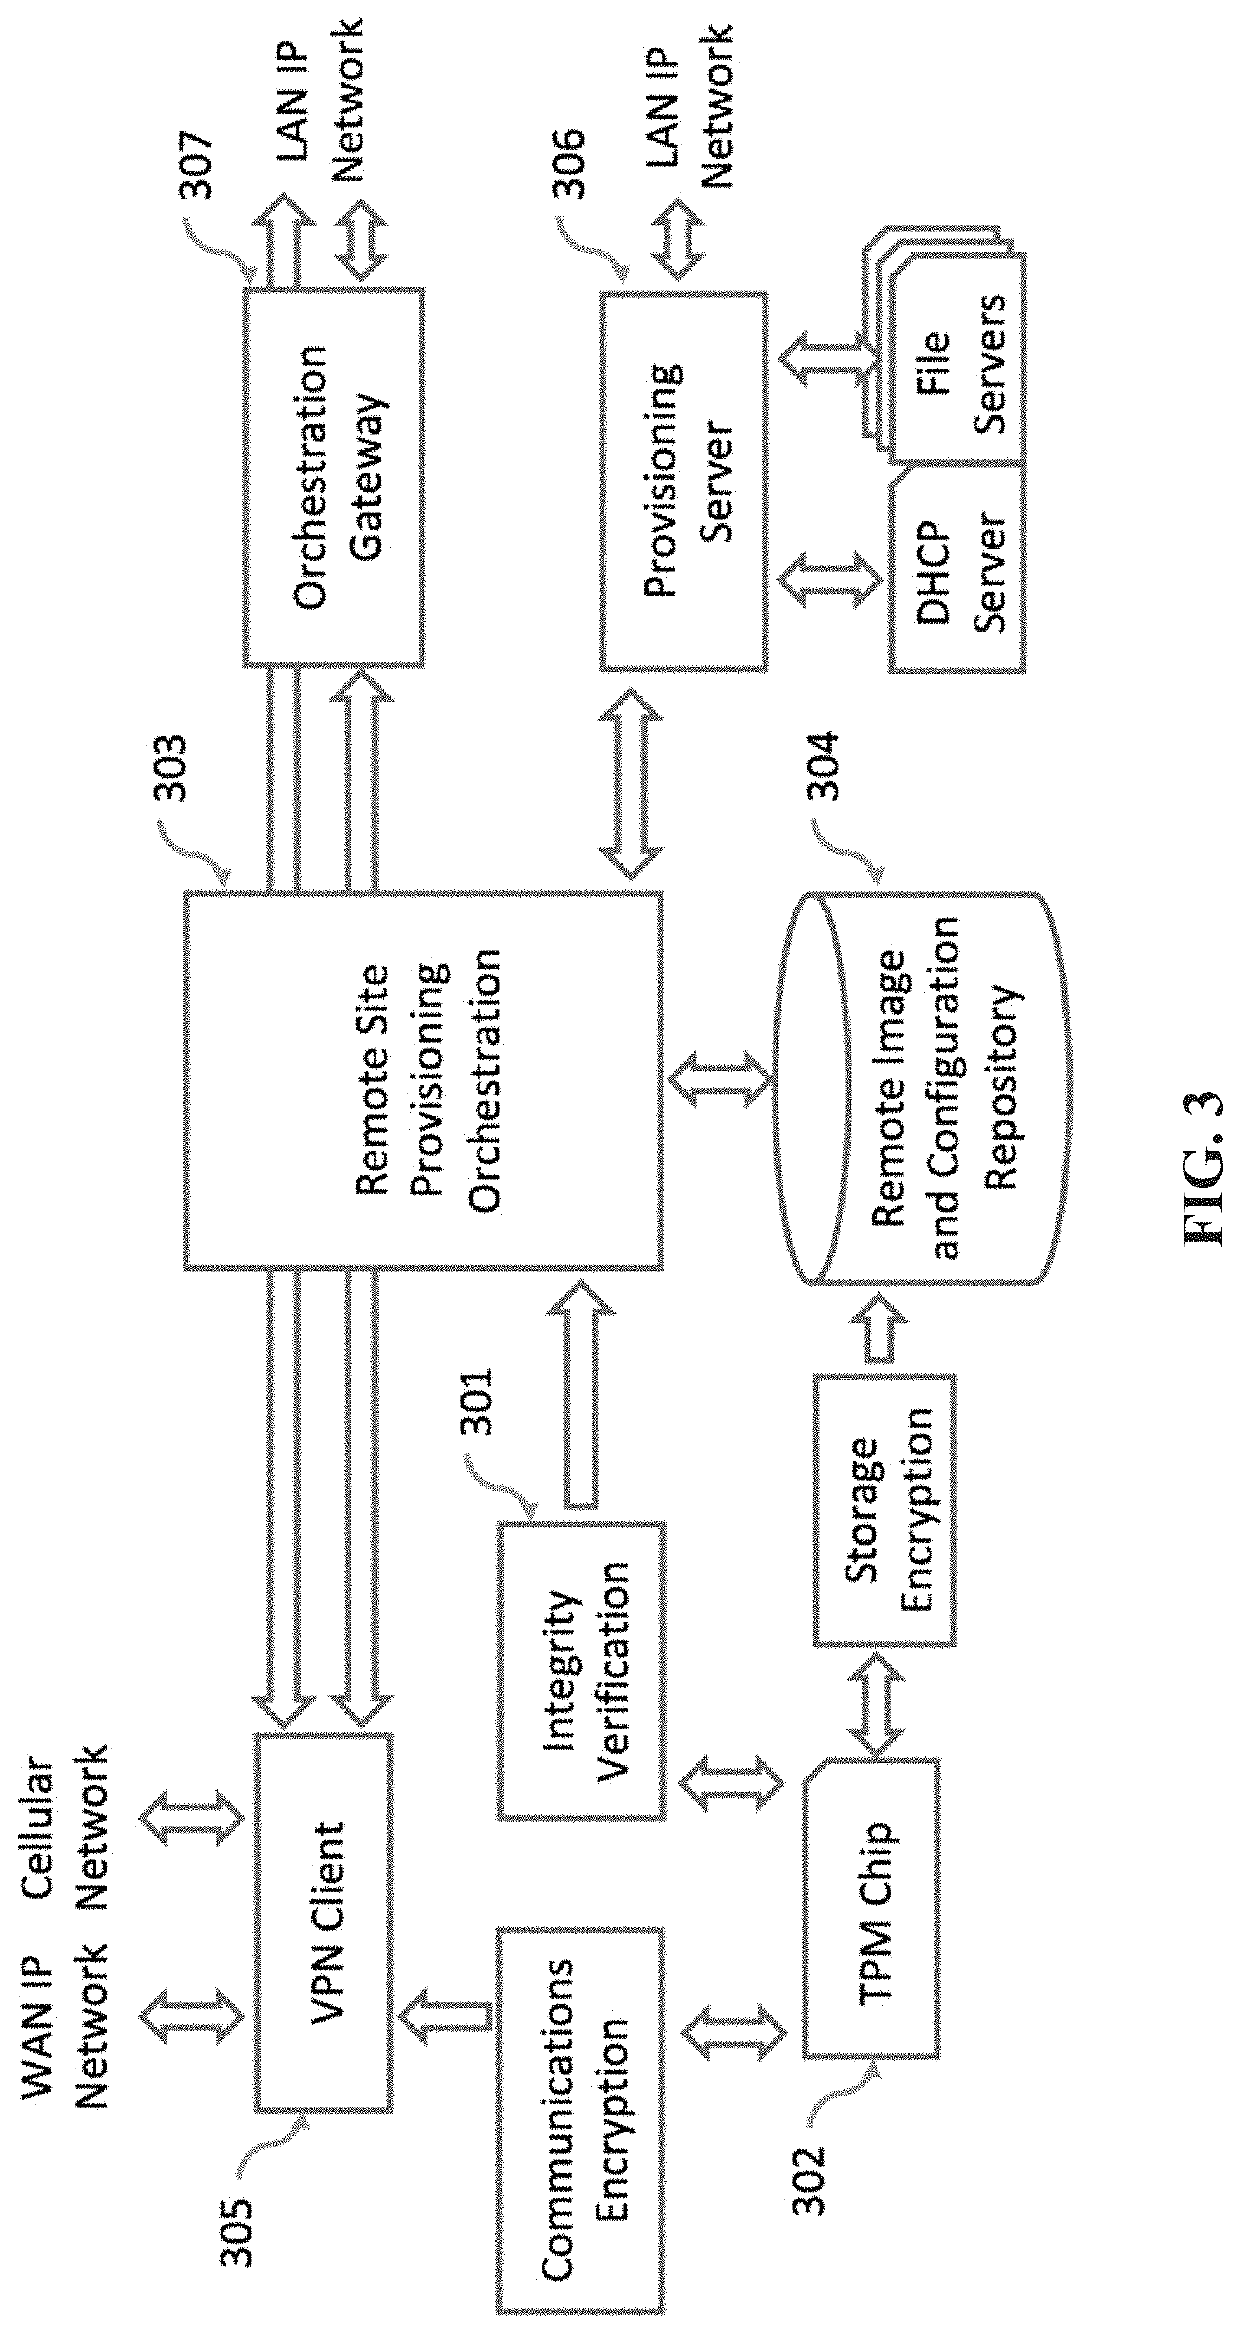 Systems and methods for automatically and securely provisioning remote computer network infrastructure